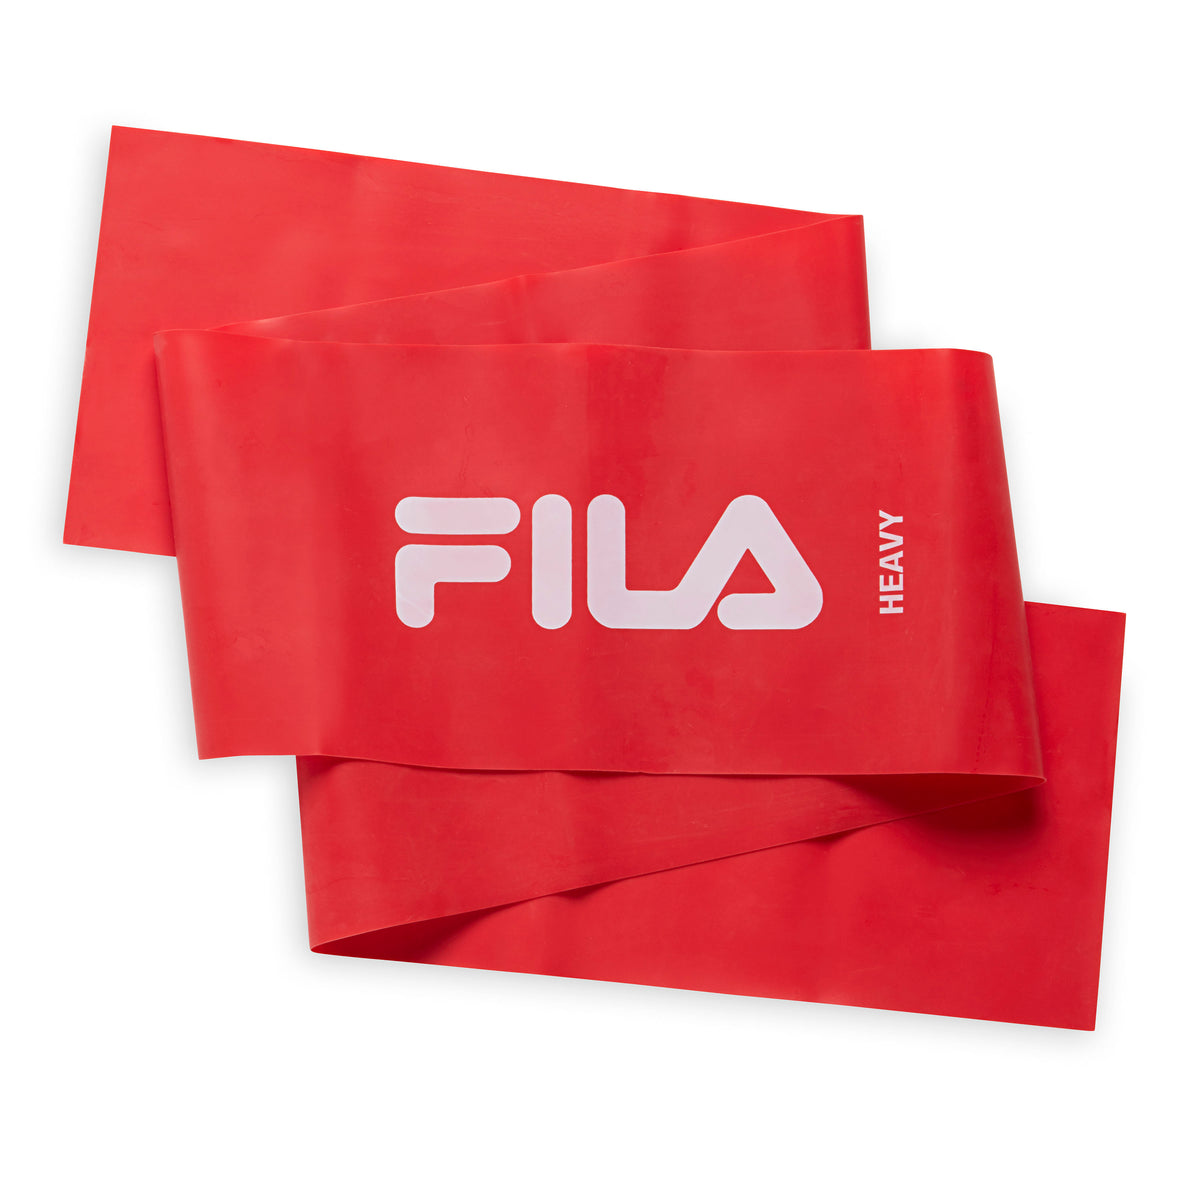 FILA Flat Resistance Bands 3-Pack heavy red